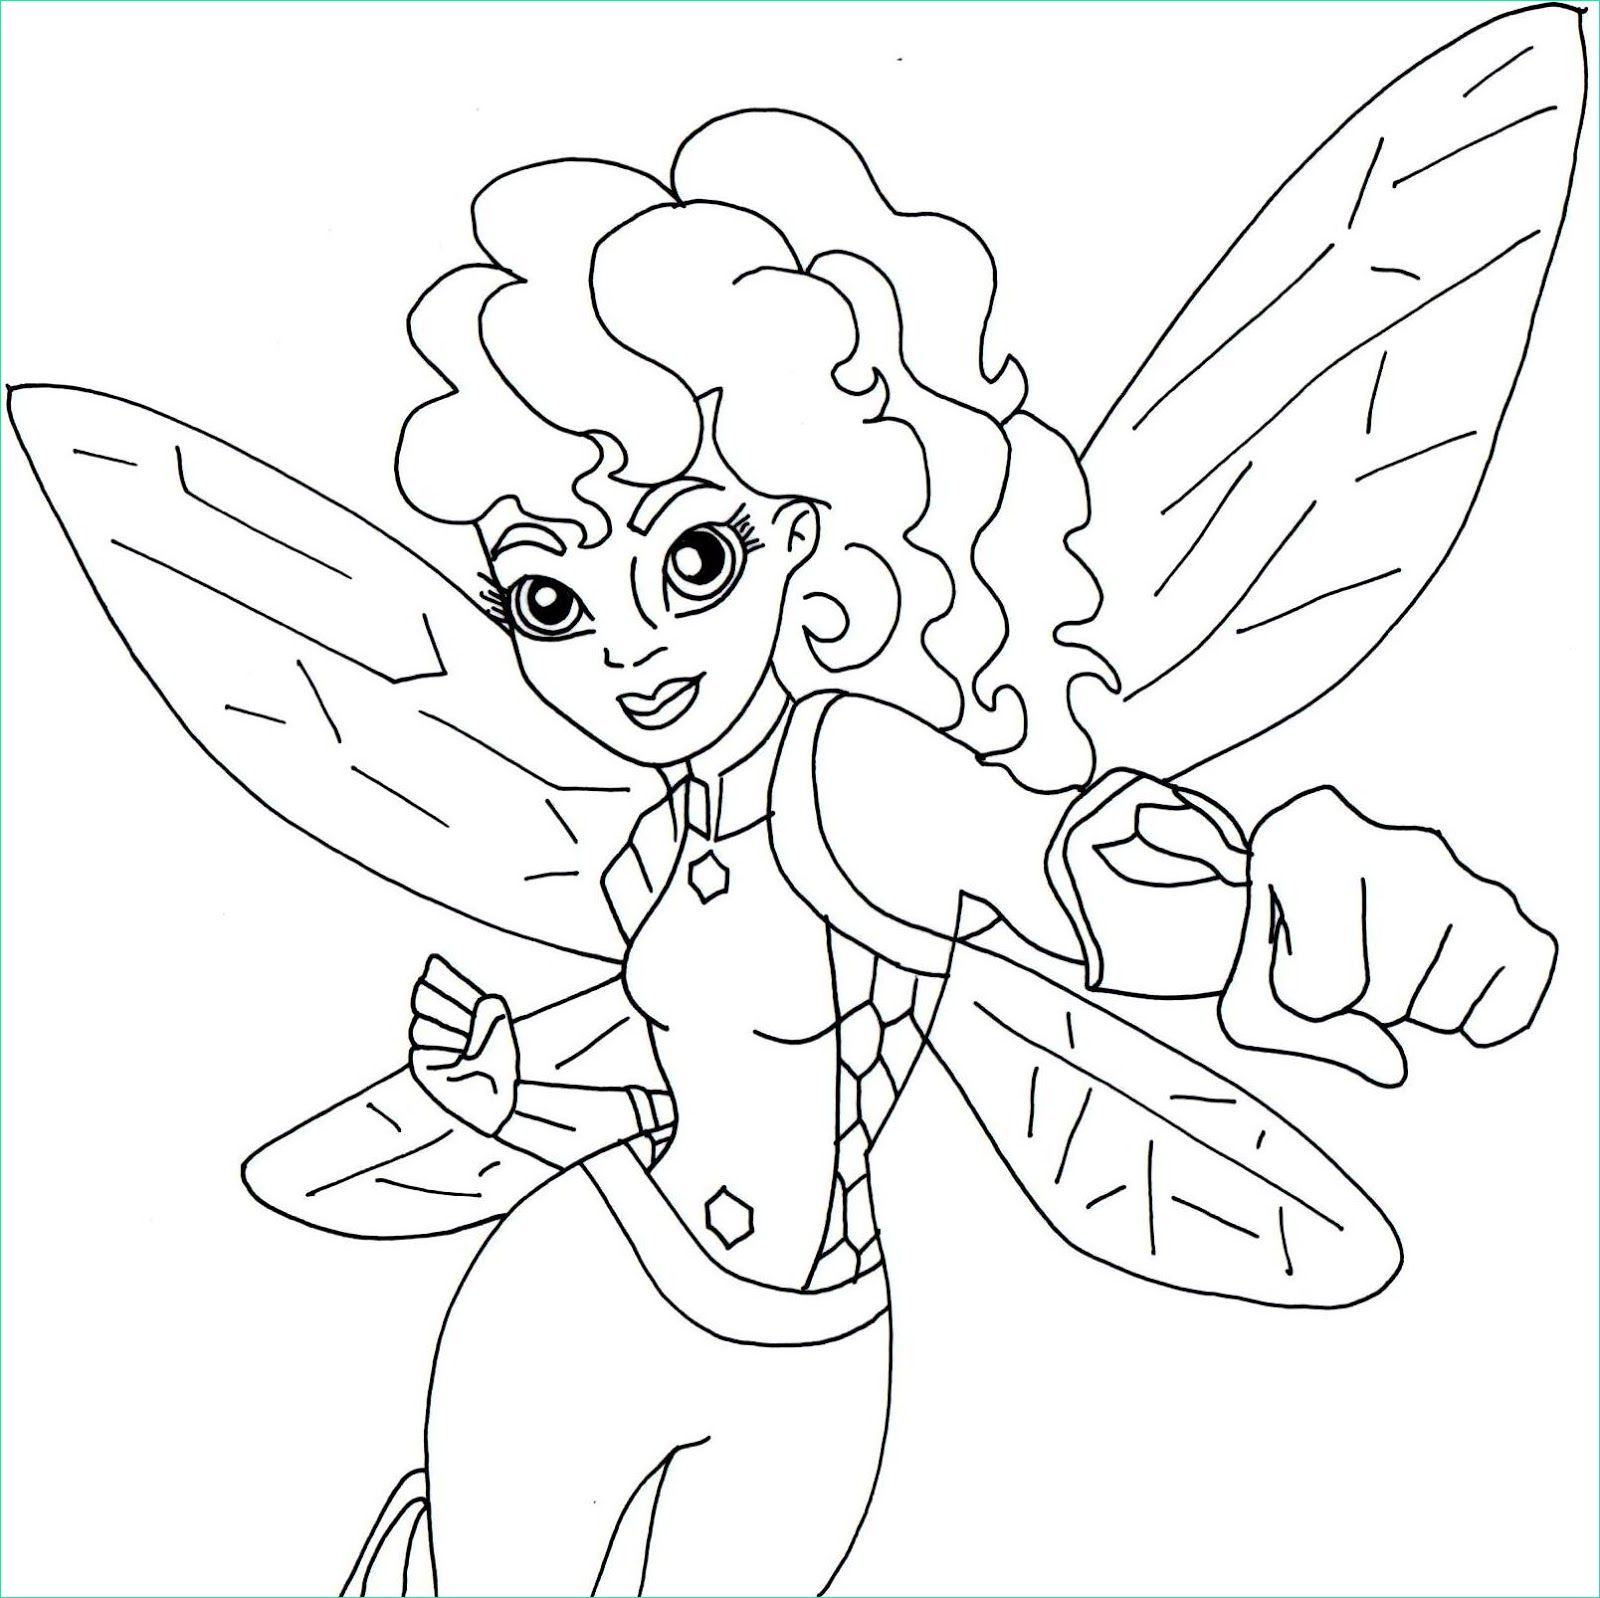 dc superhero girl coloring pages